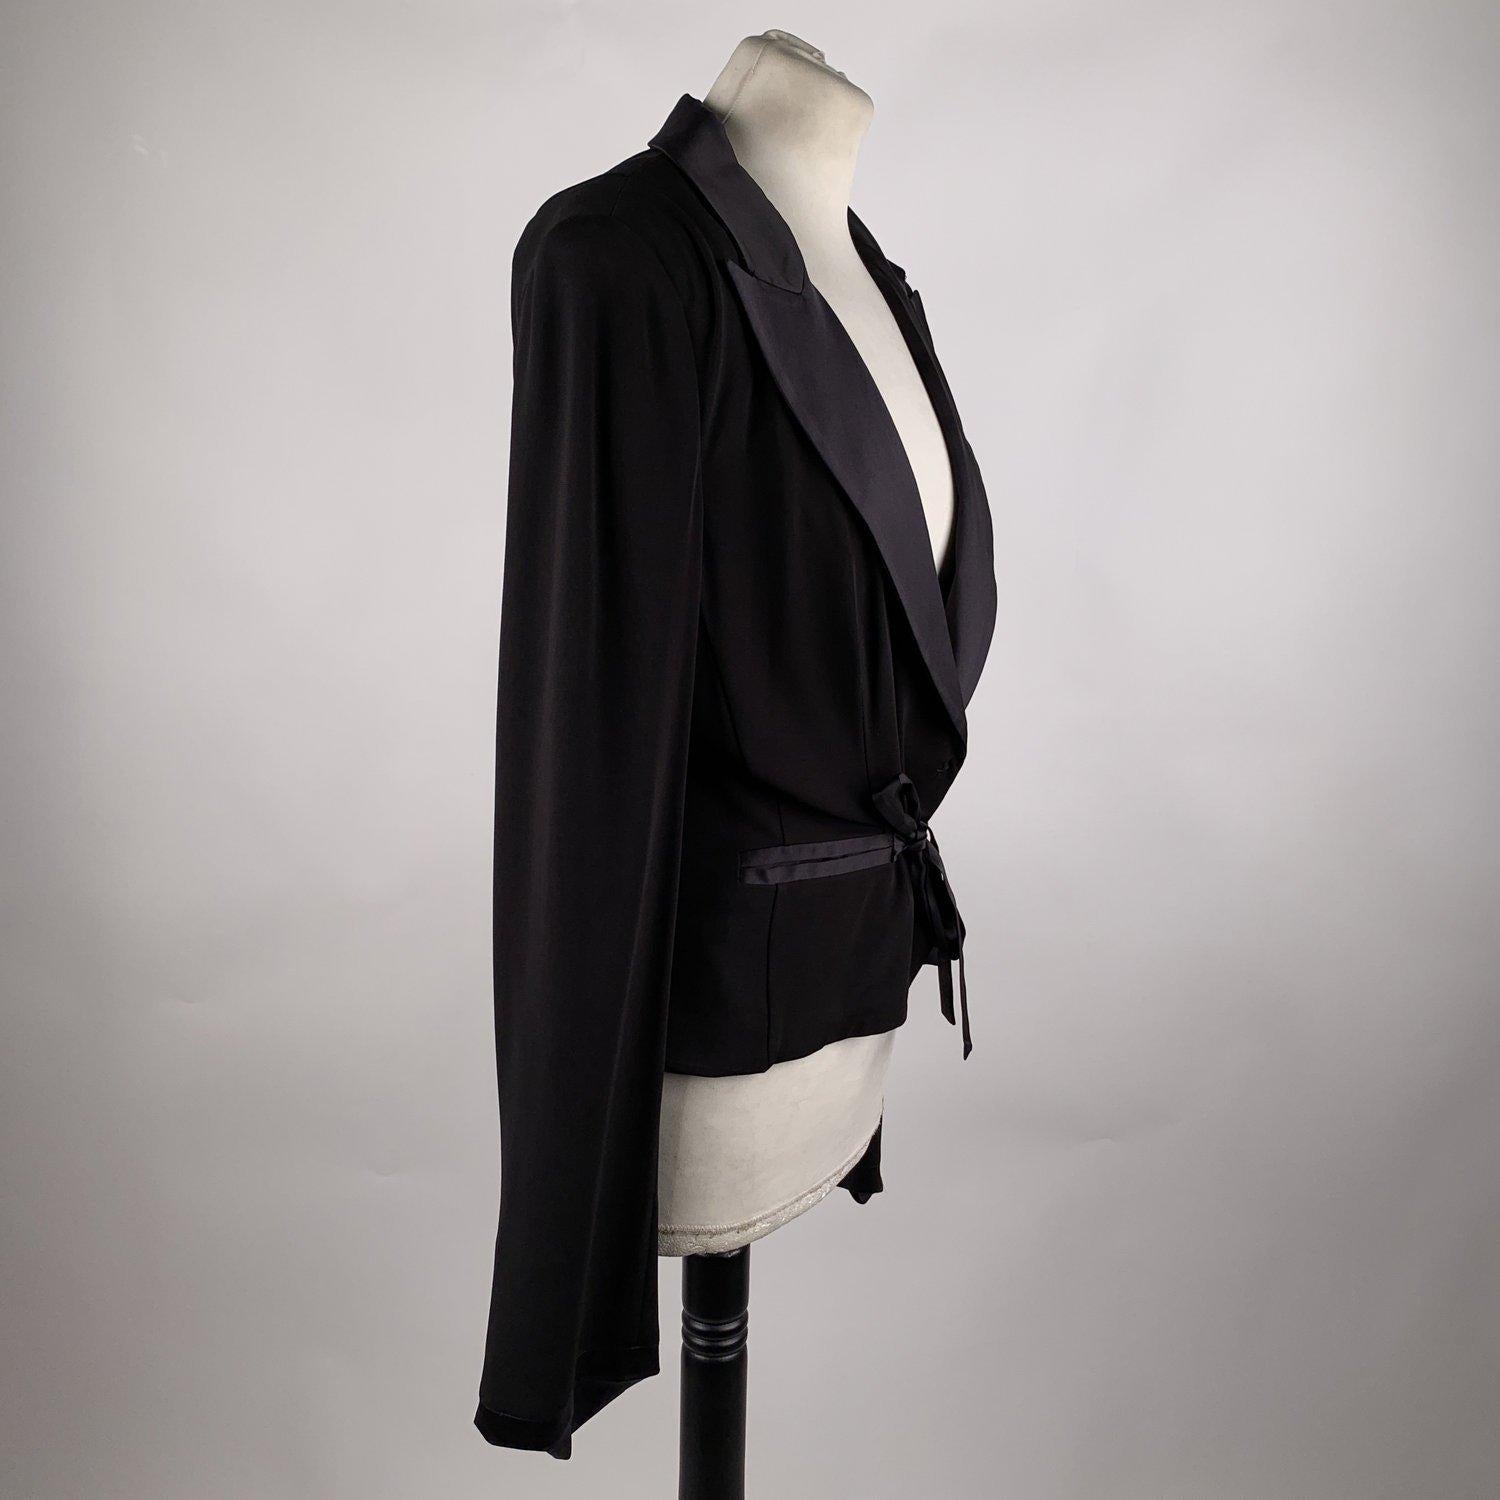 Gianfranco Ferré Black Blazer Jacket with Silk Trim Size 44 In Excellent Condition In Rome, Rome